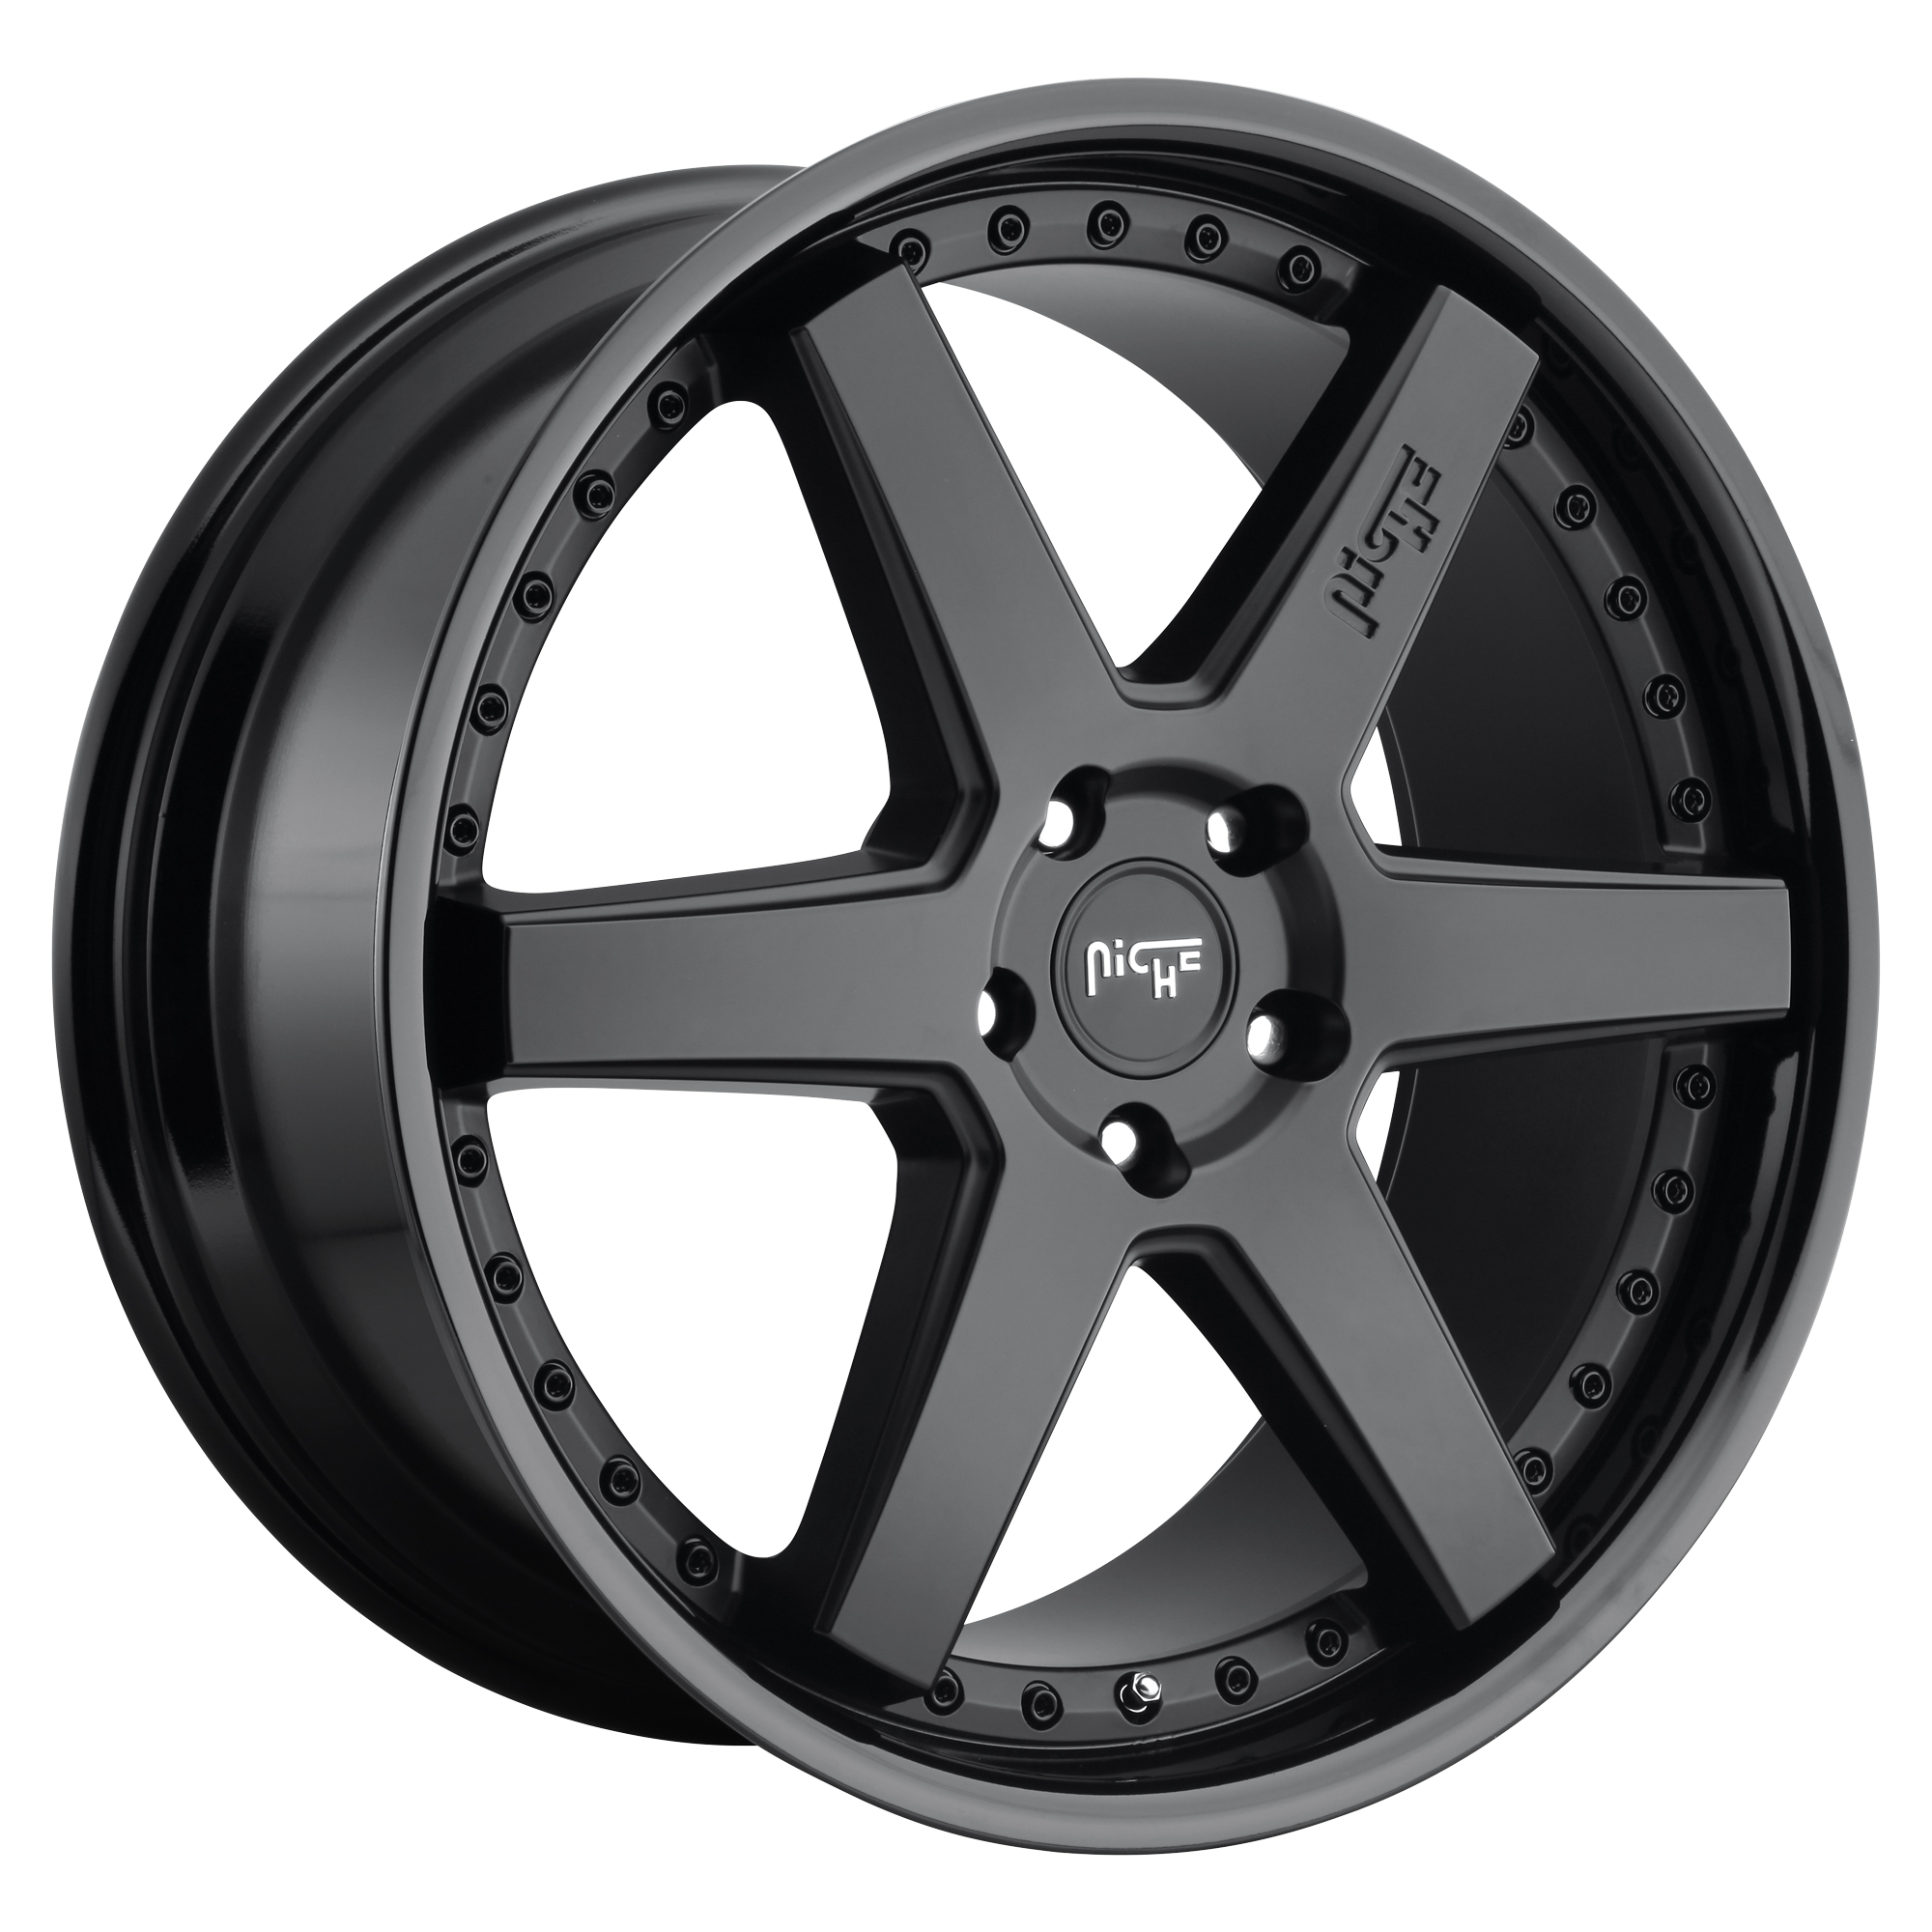 ALTAIR 19x8.5 5x114.30 GLOSS BLACK MATTE BLACK (35 mm) - Tires and Engine Performance